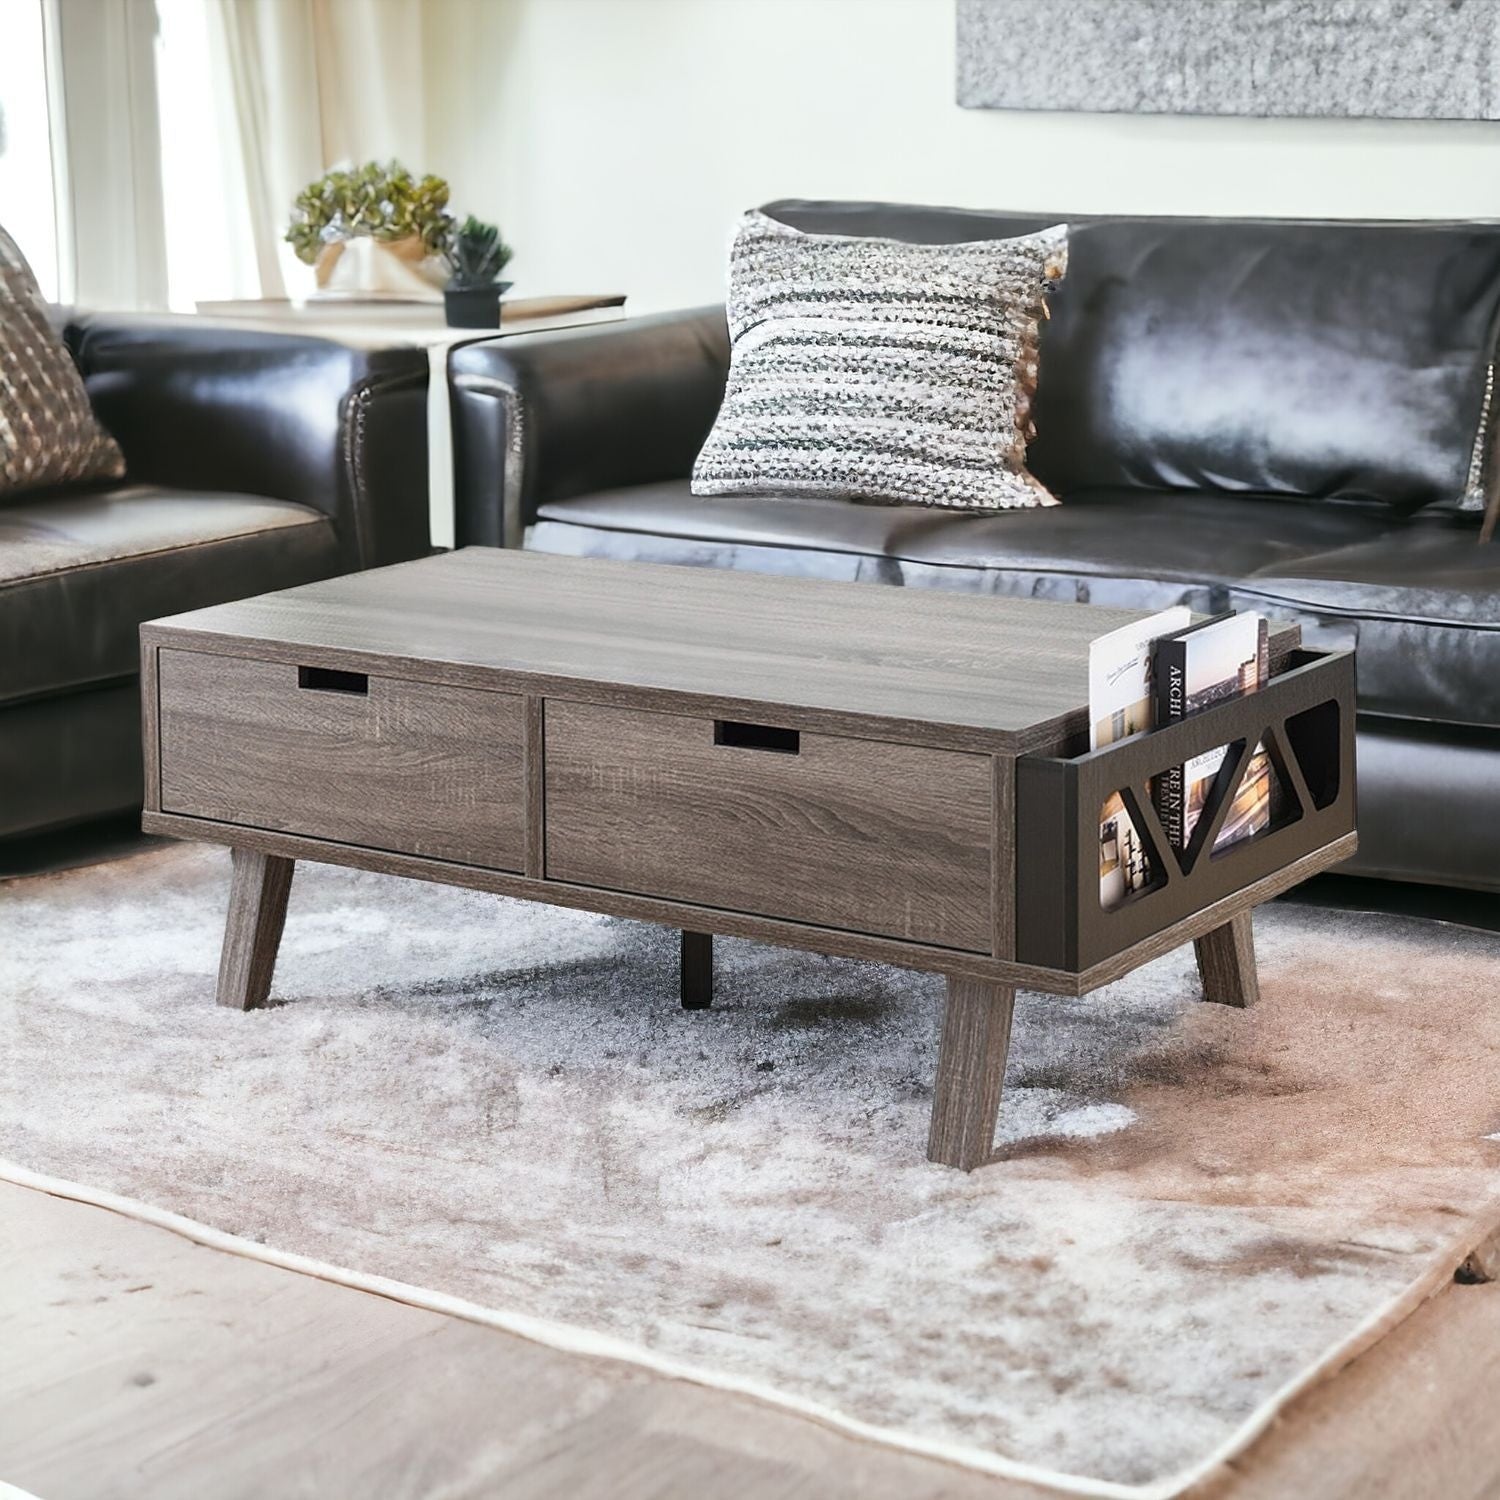 47" Gray Distressed Coffee Table With Two Drawers And Shelf